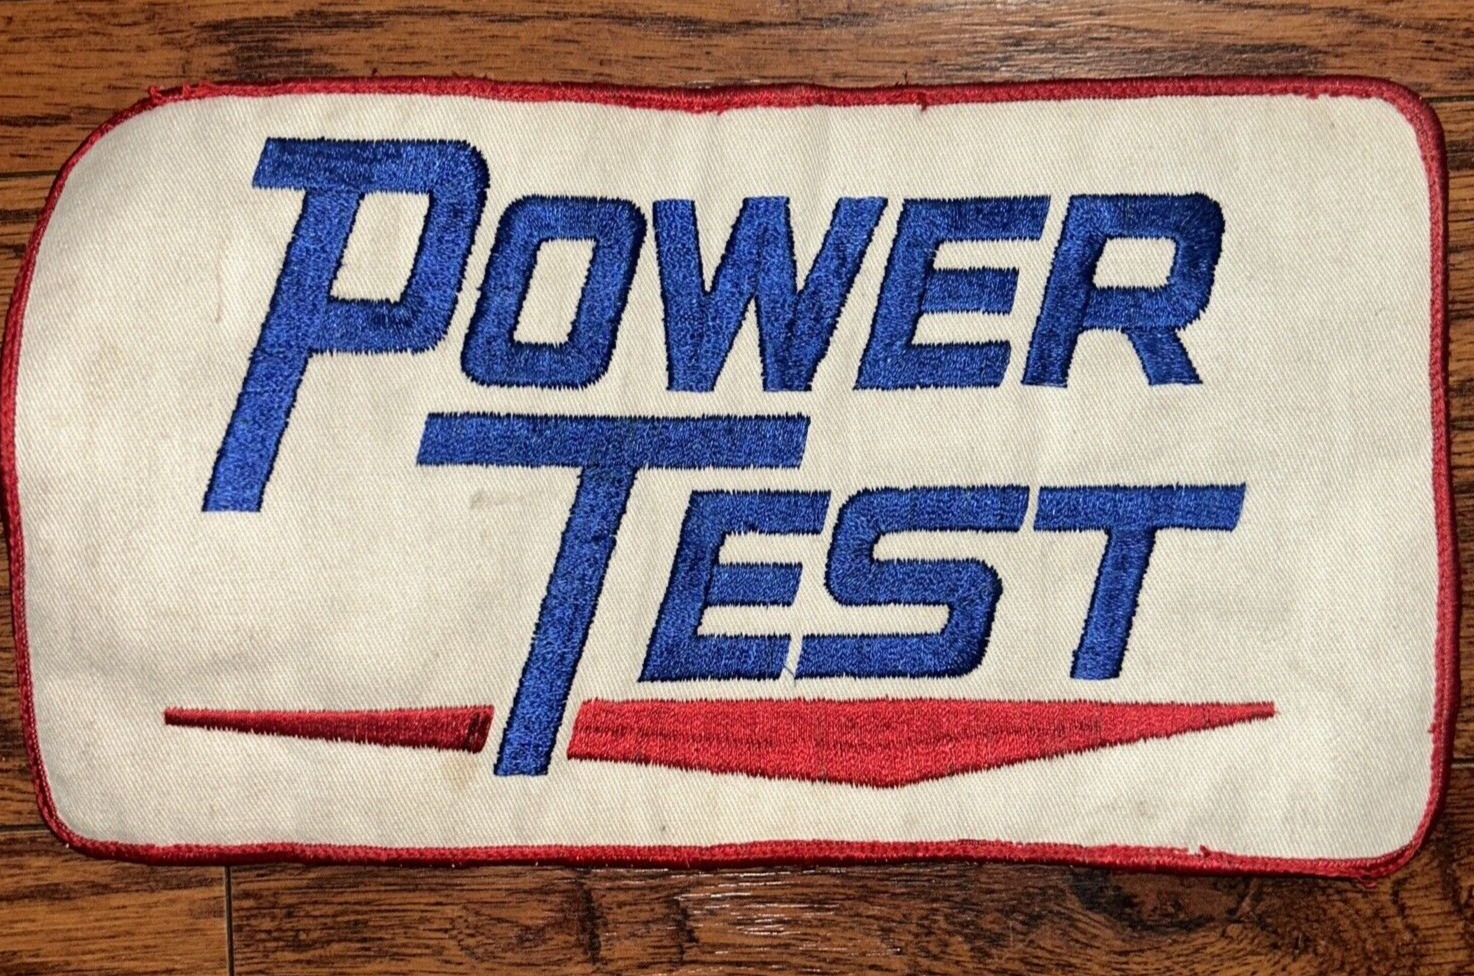 Power Test - Mechanics Garage Patch / Vintage 1970/80’s  10.5 x6 - worn and used